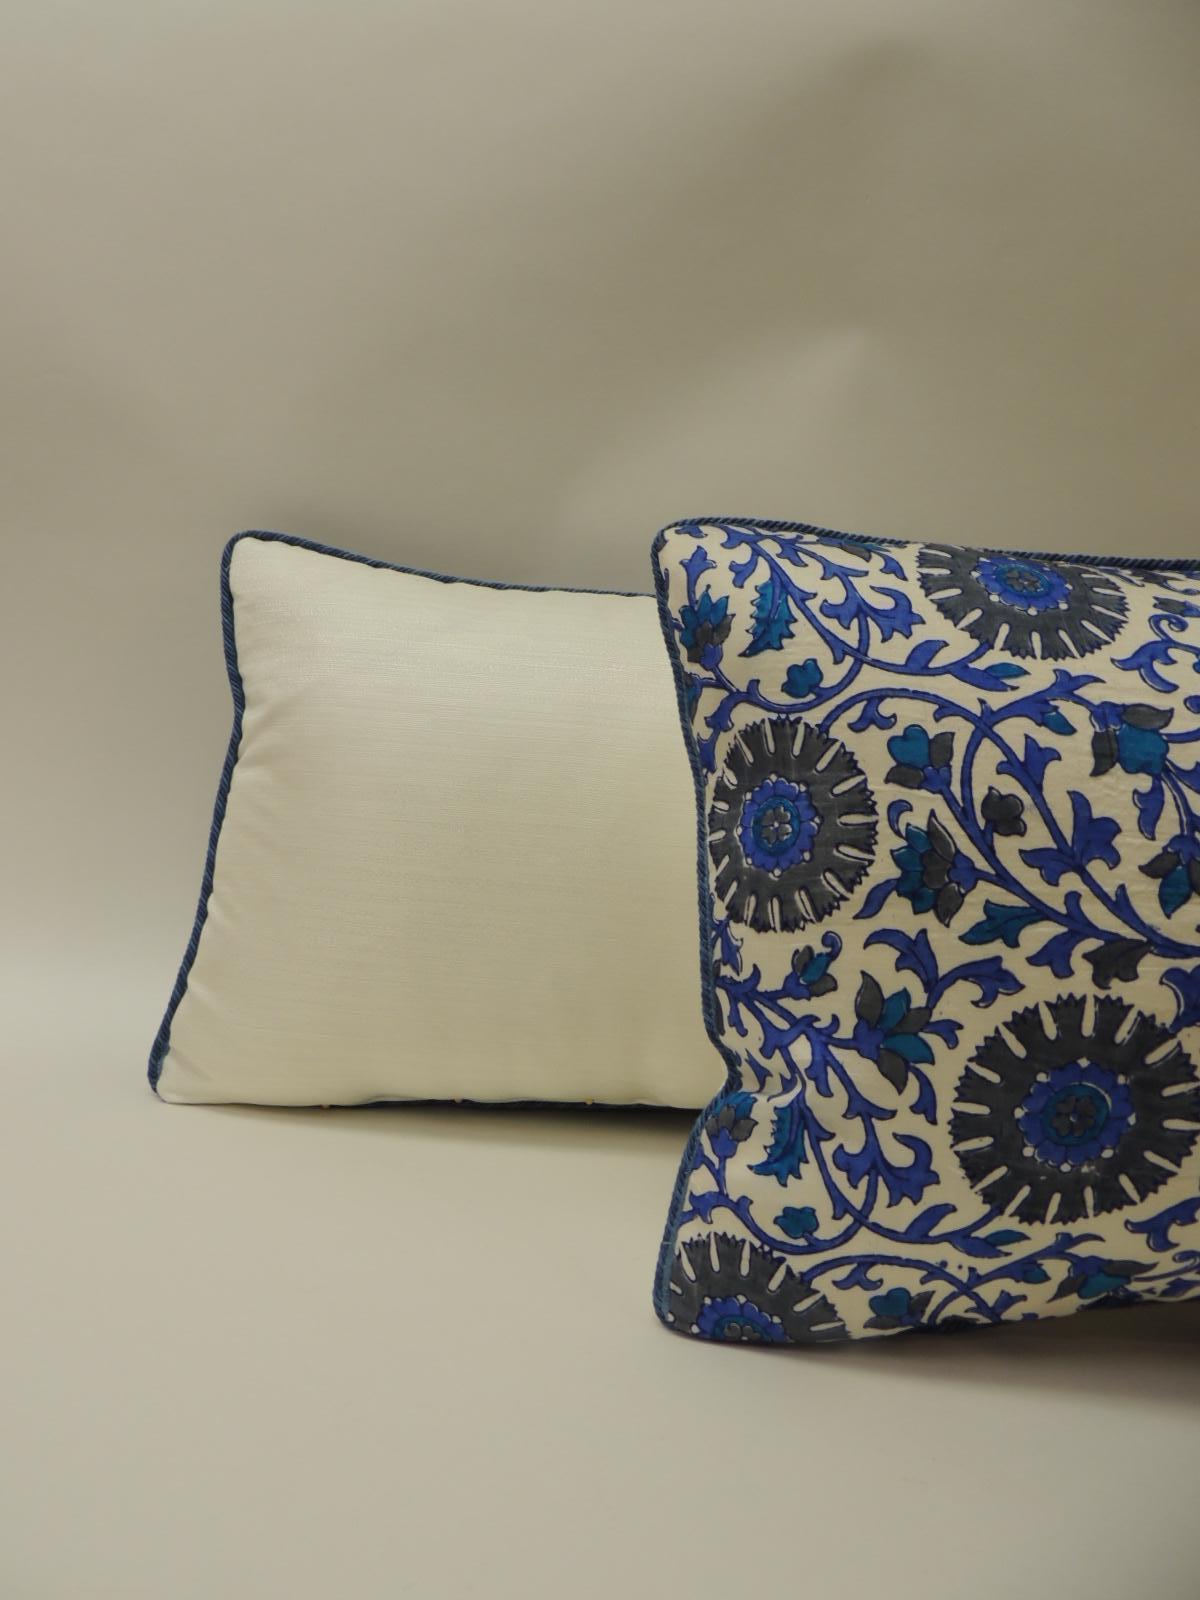 Late 20th Century Vintage Long Blue and White Silk Floral Bolster Decorative Pillow